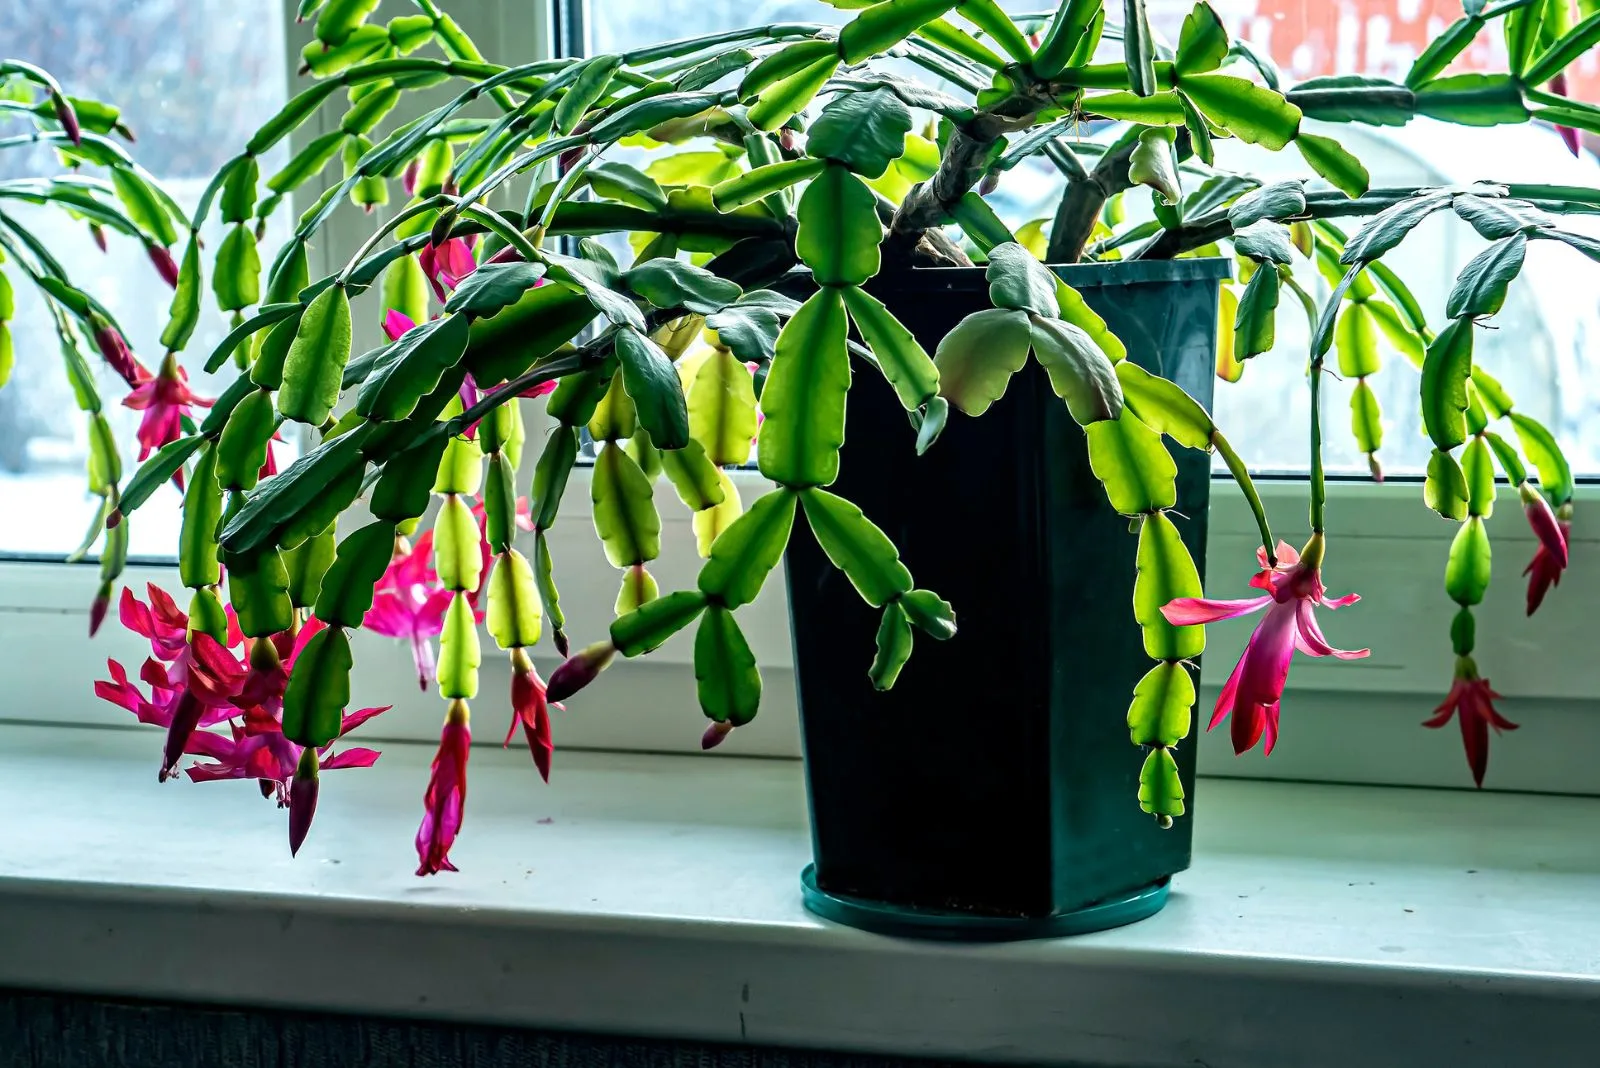 Christmas cactus in a black pot by the window